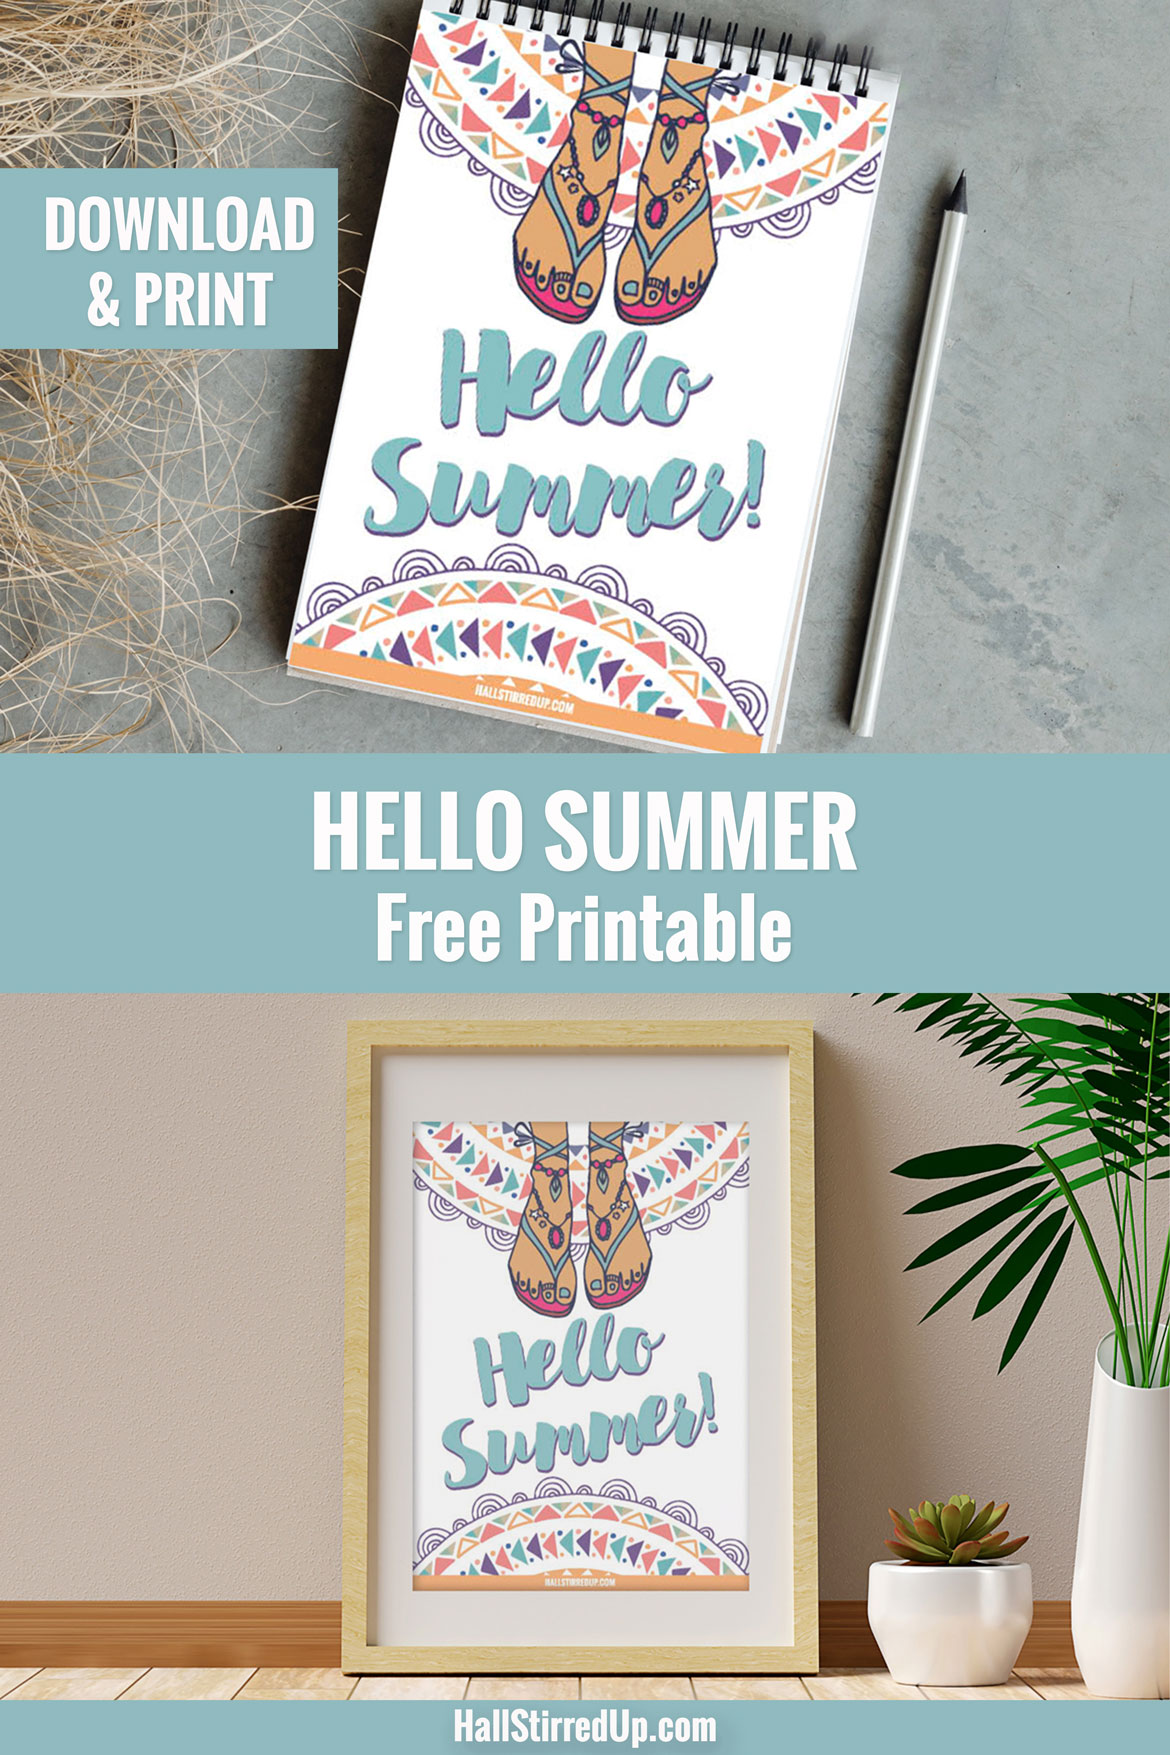 Summer Days! Let's celebrate with a fun free printable